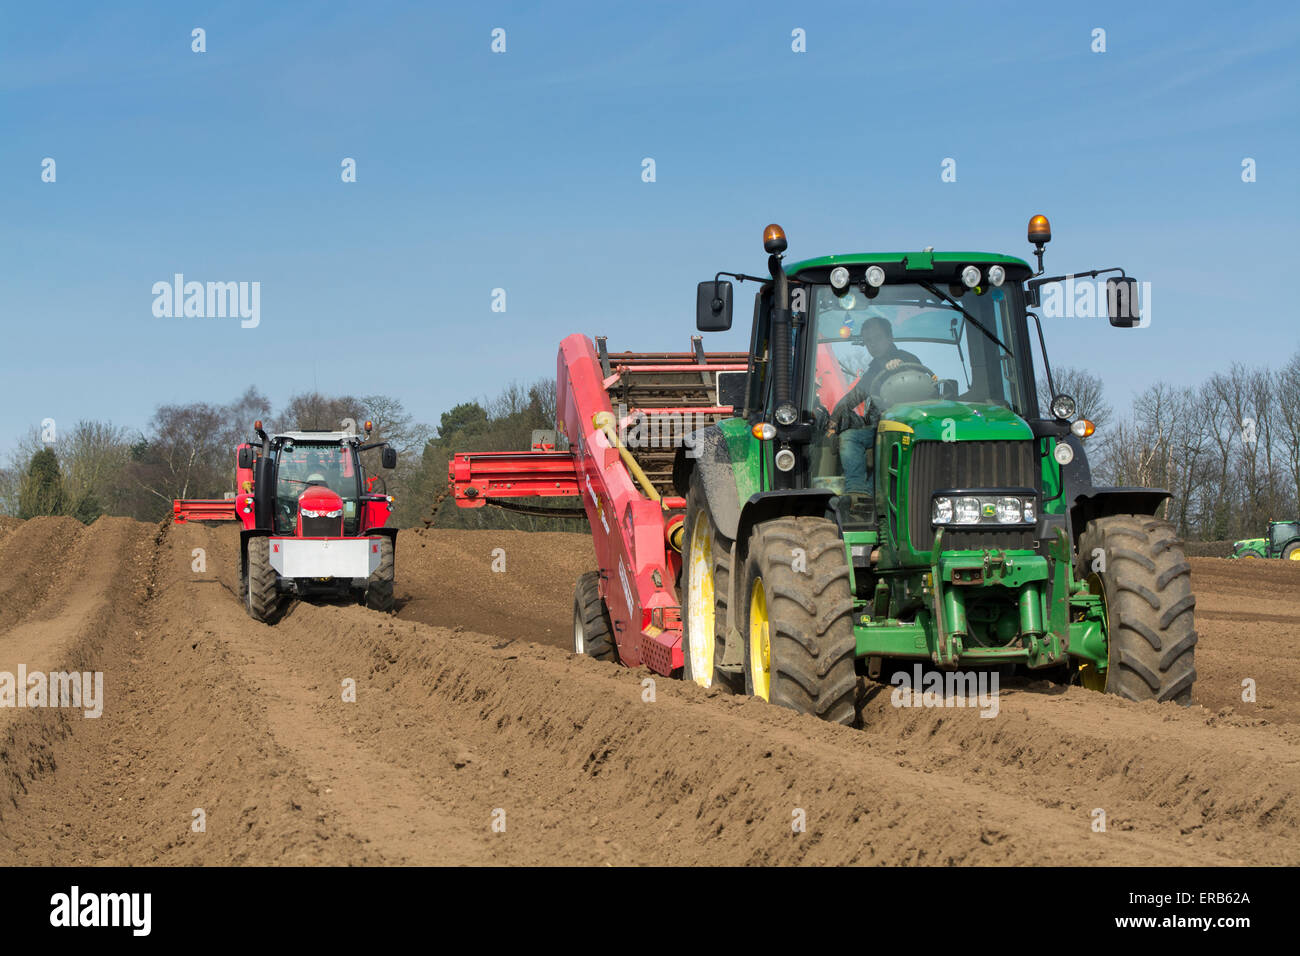 Preparing potato seed bed, using Grimme stone removing machine pulled by a John Deere 6930, Yorkshire, UK. Stock Photo